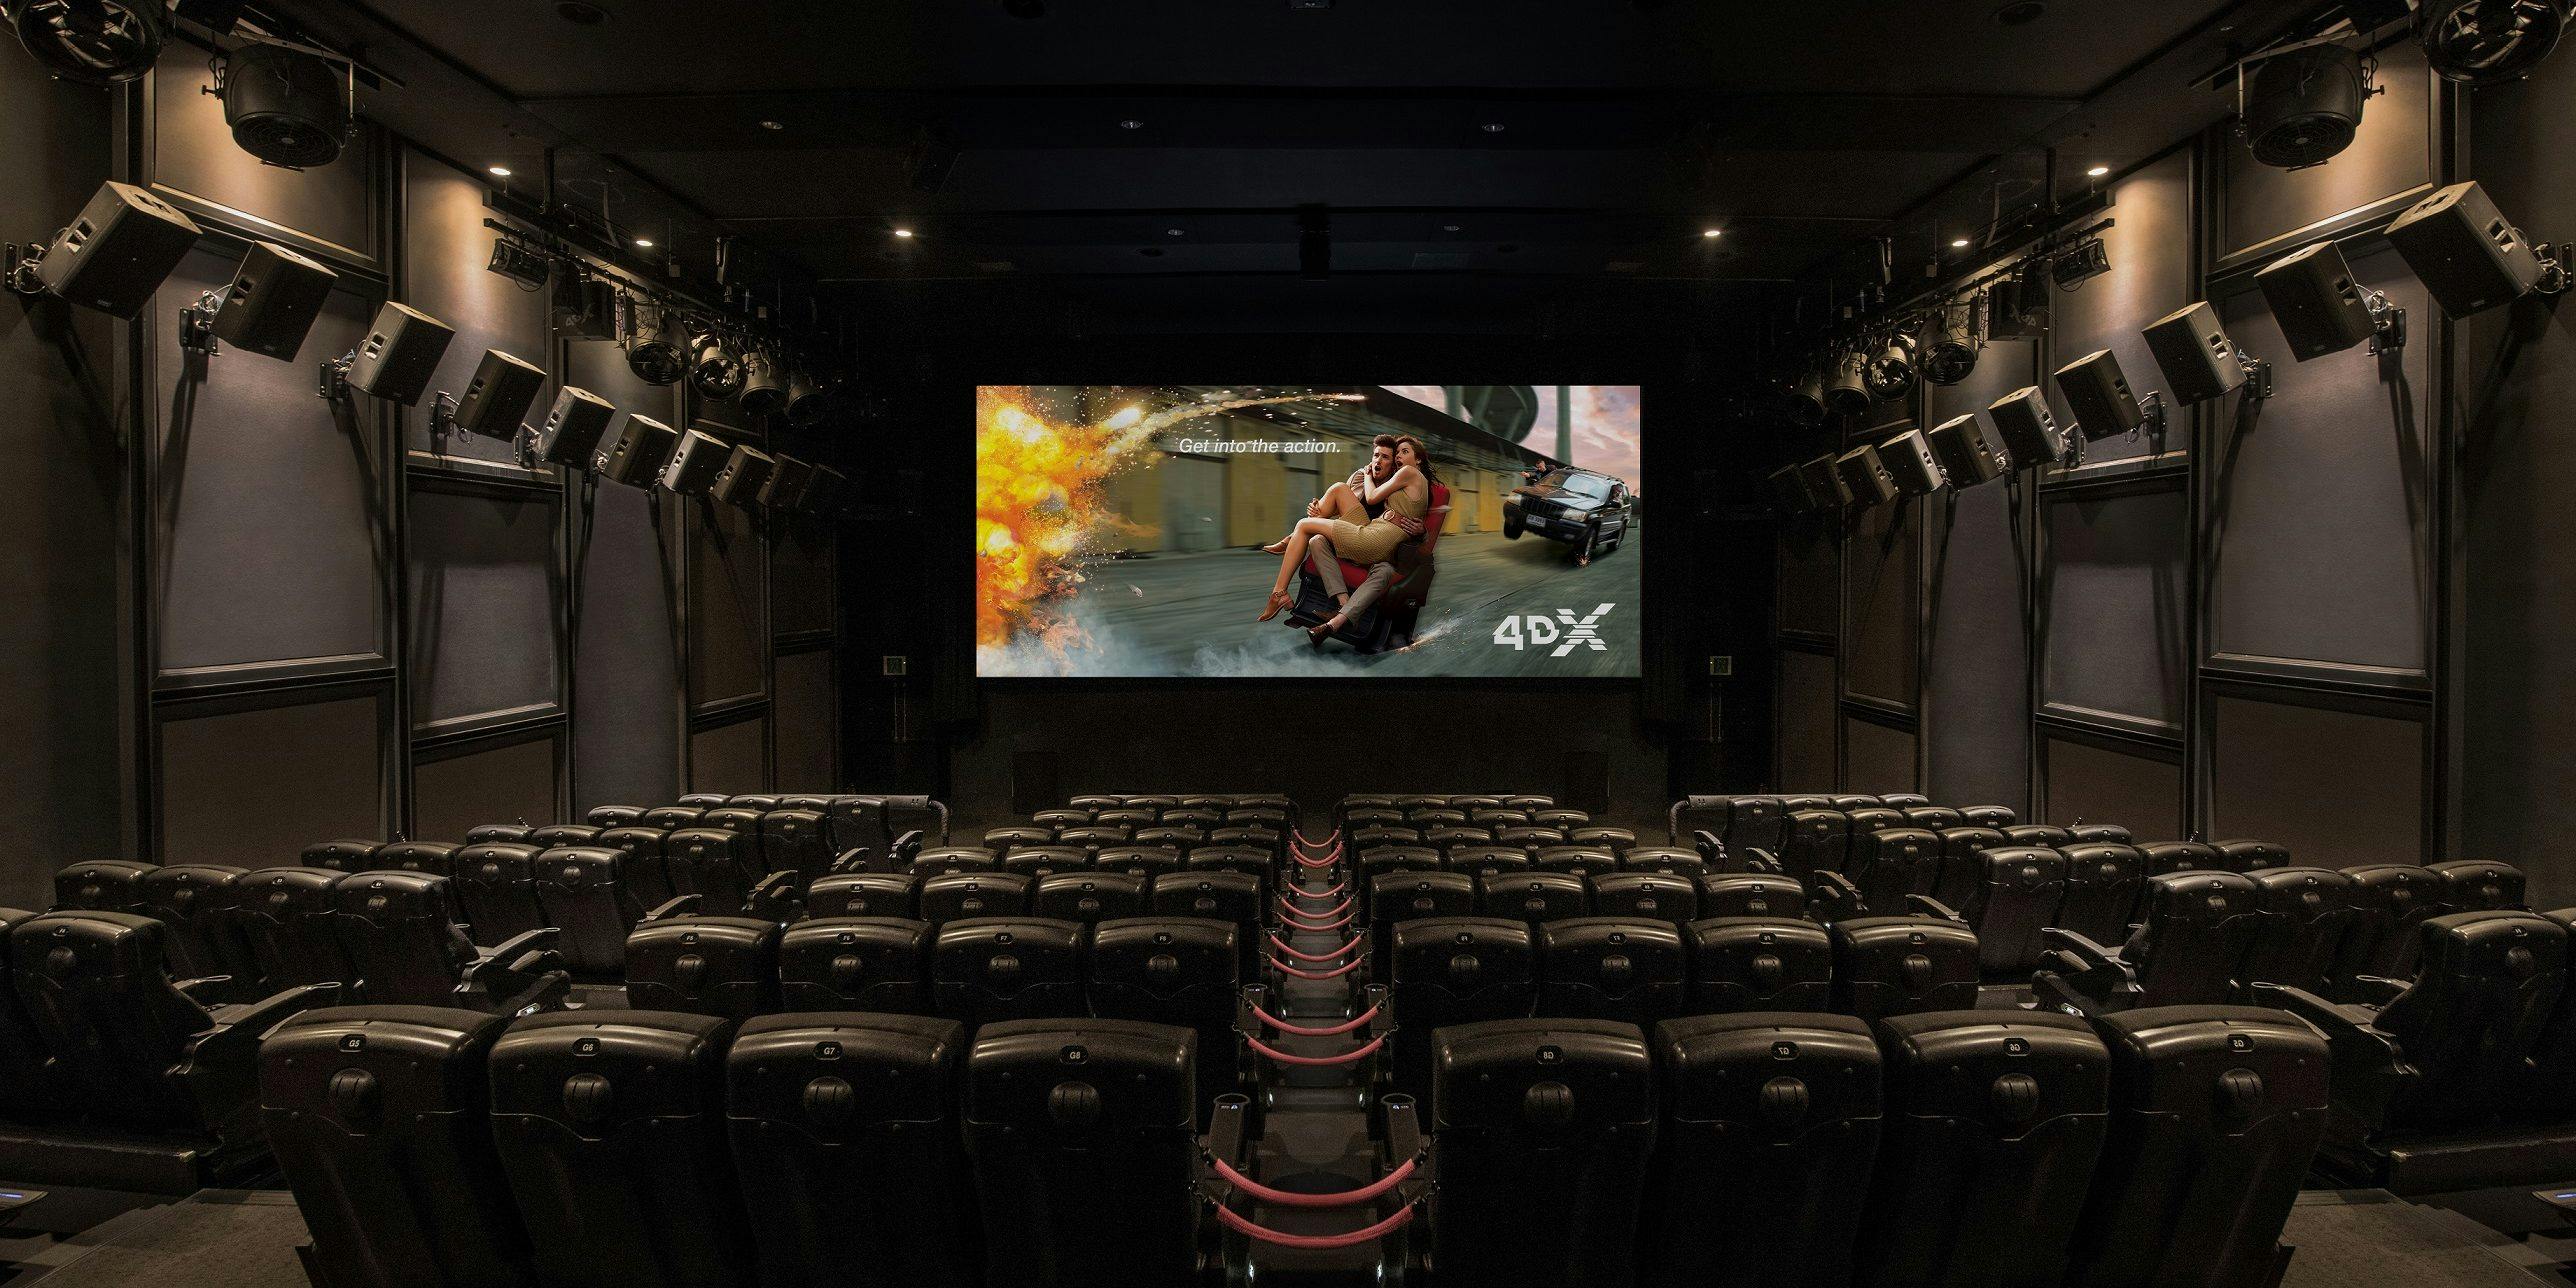 4DX Movies What They Are, How They're Made & What's Next